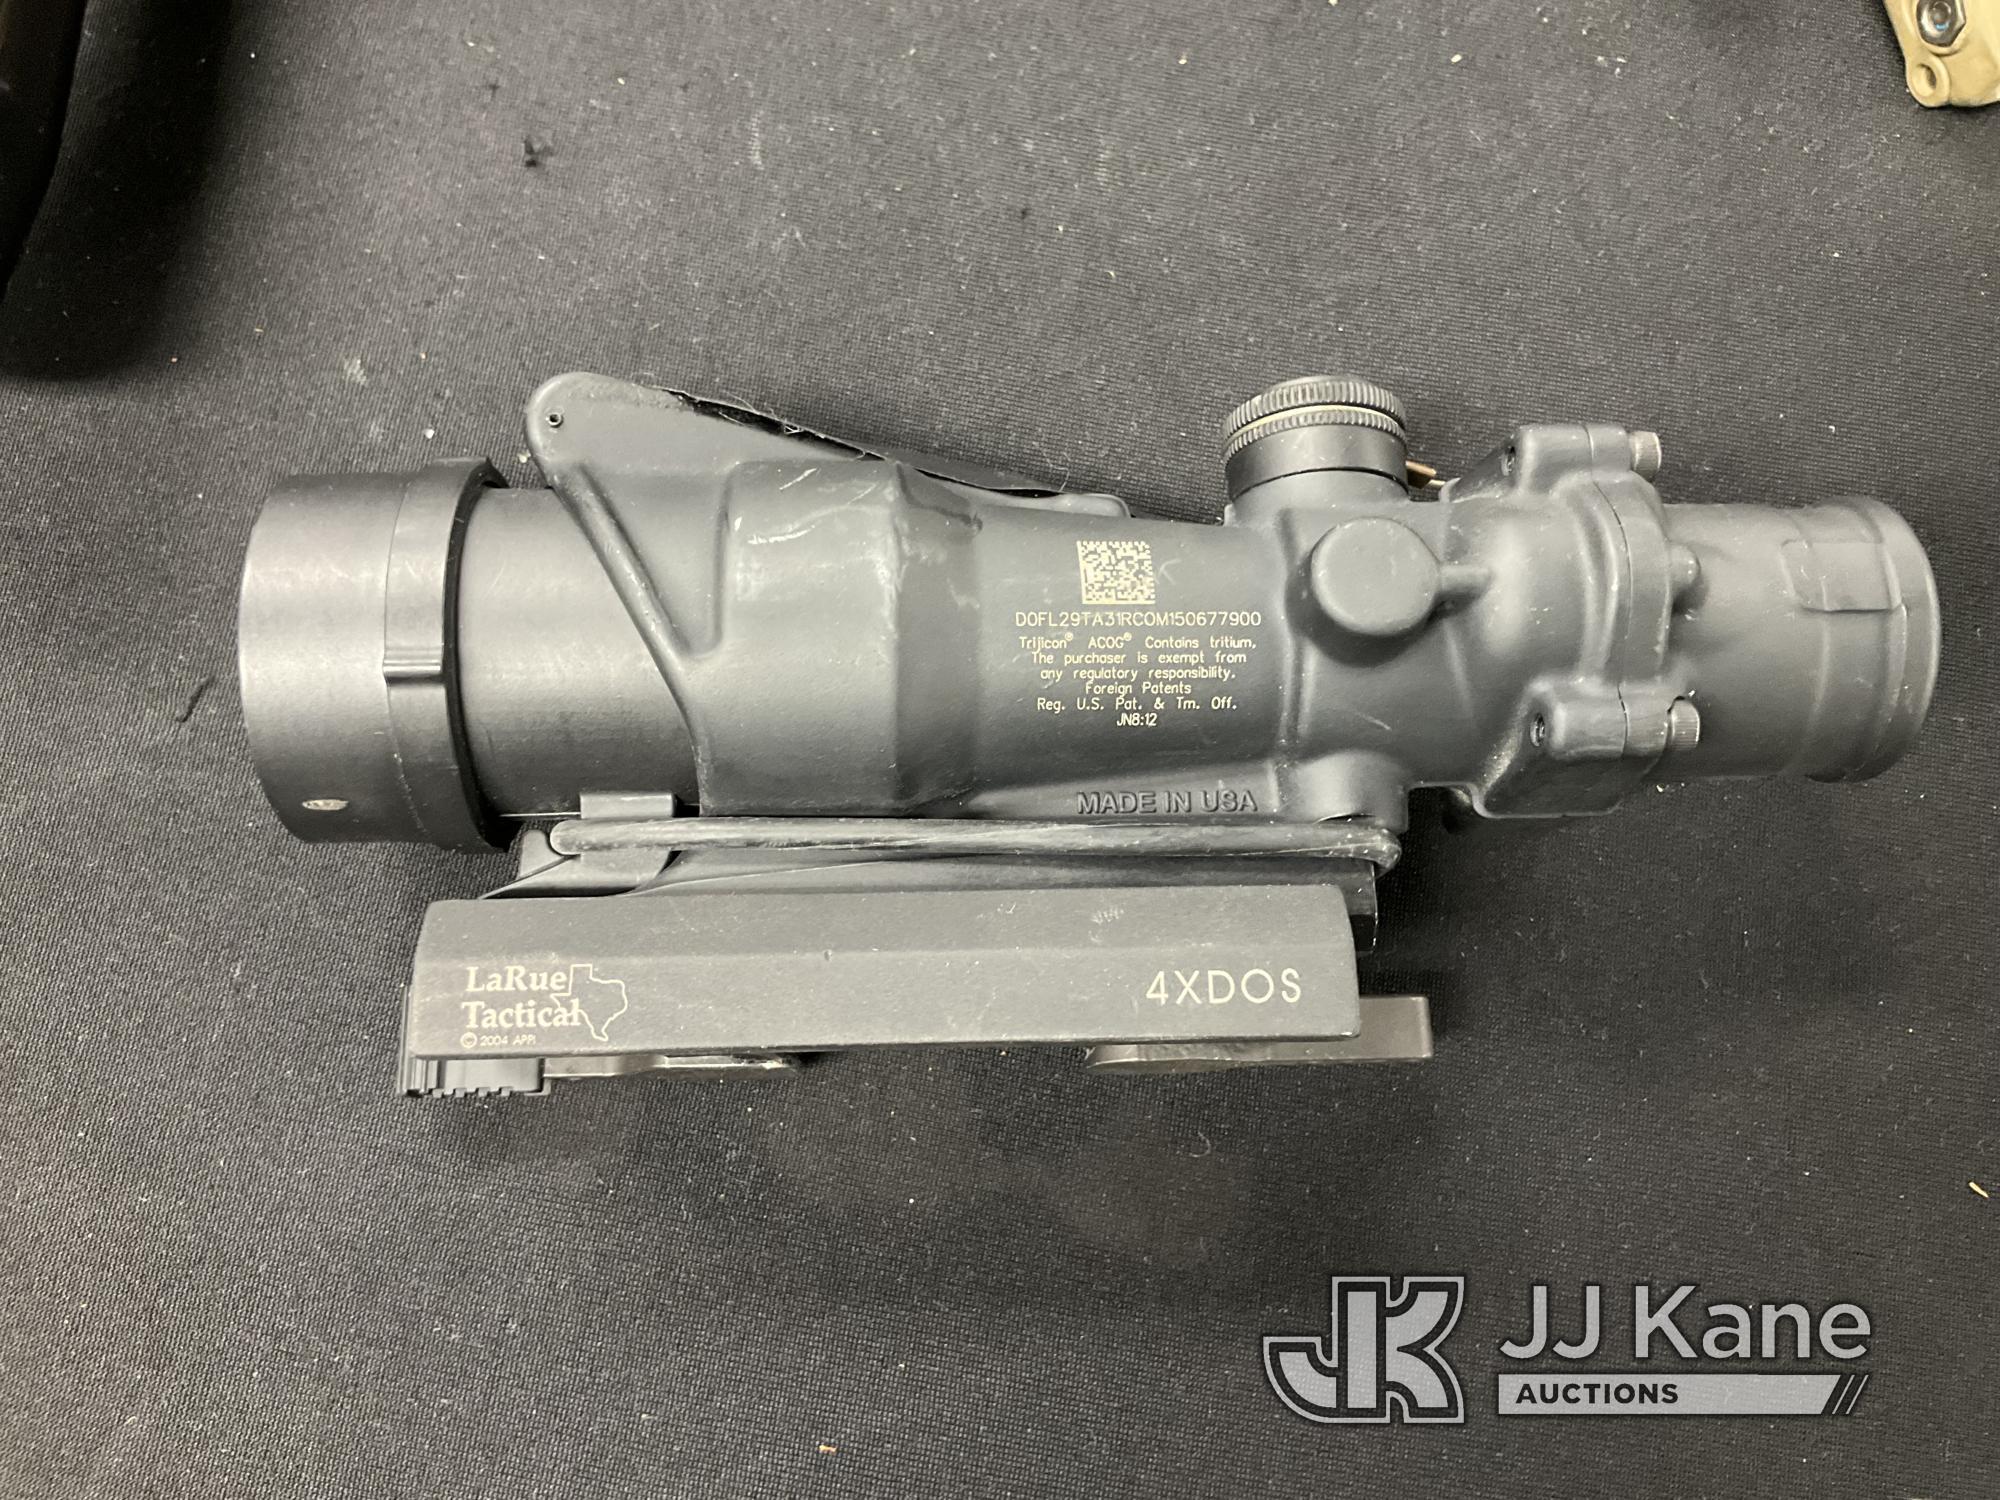 (Jurupa Valley, CA) Gun Scopes / Attachments (Used) NOTE: This unit is being sold AS IS/WHERE IS via